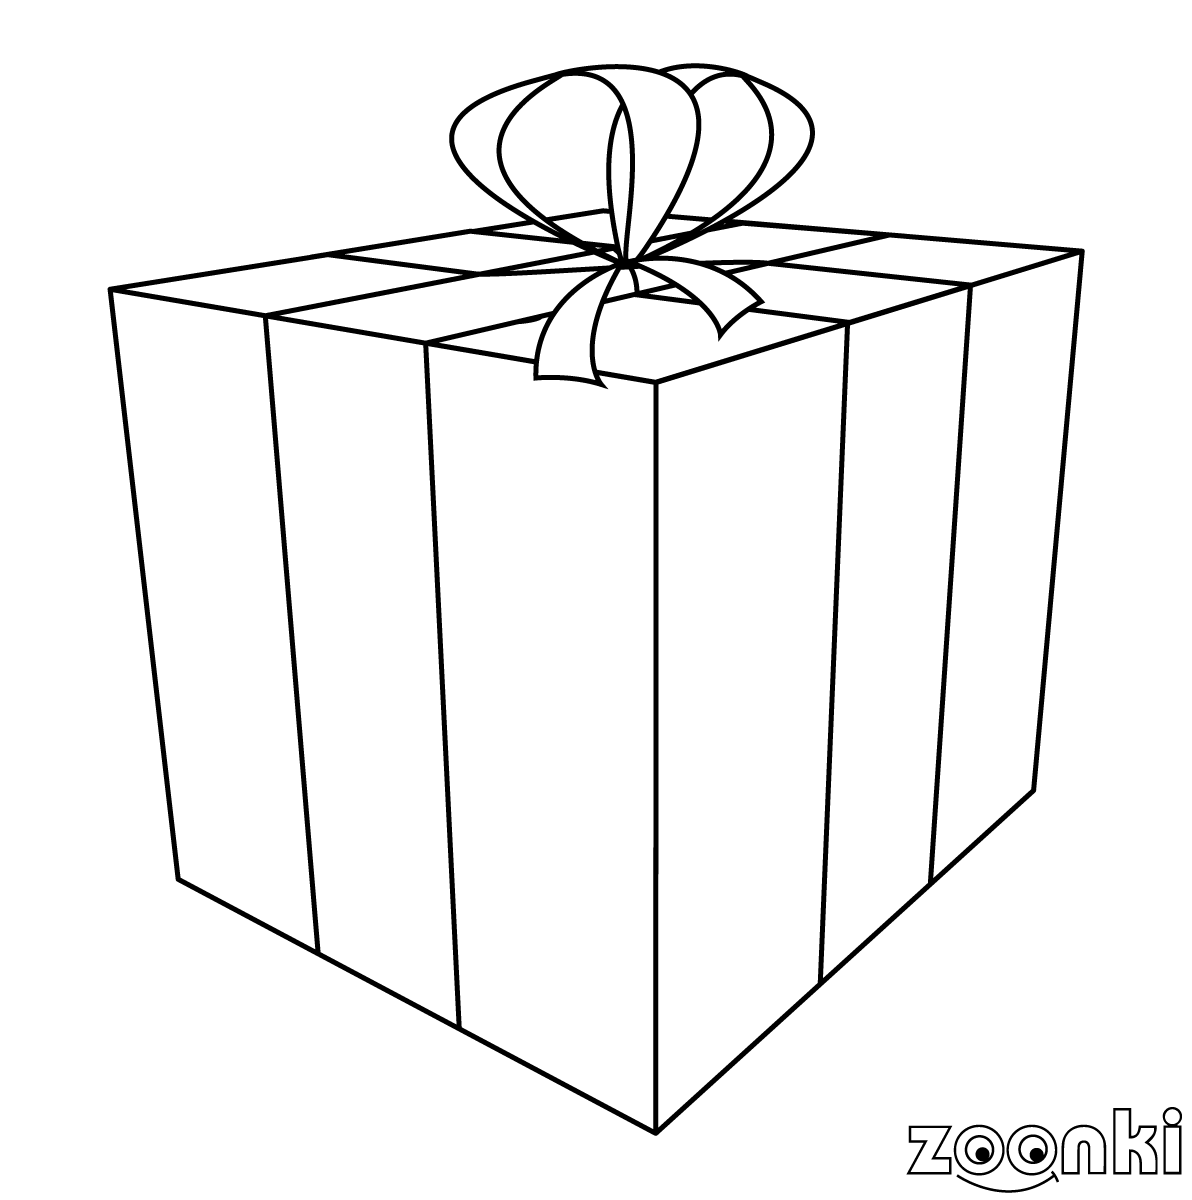 zoonki black & white Christmas present - coloring pages